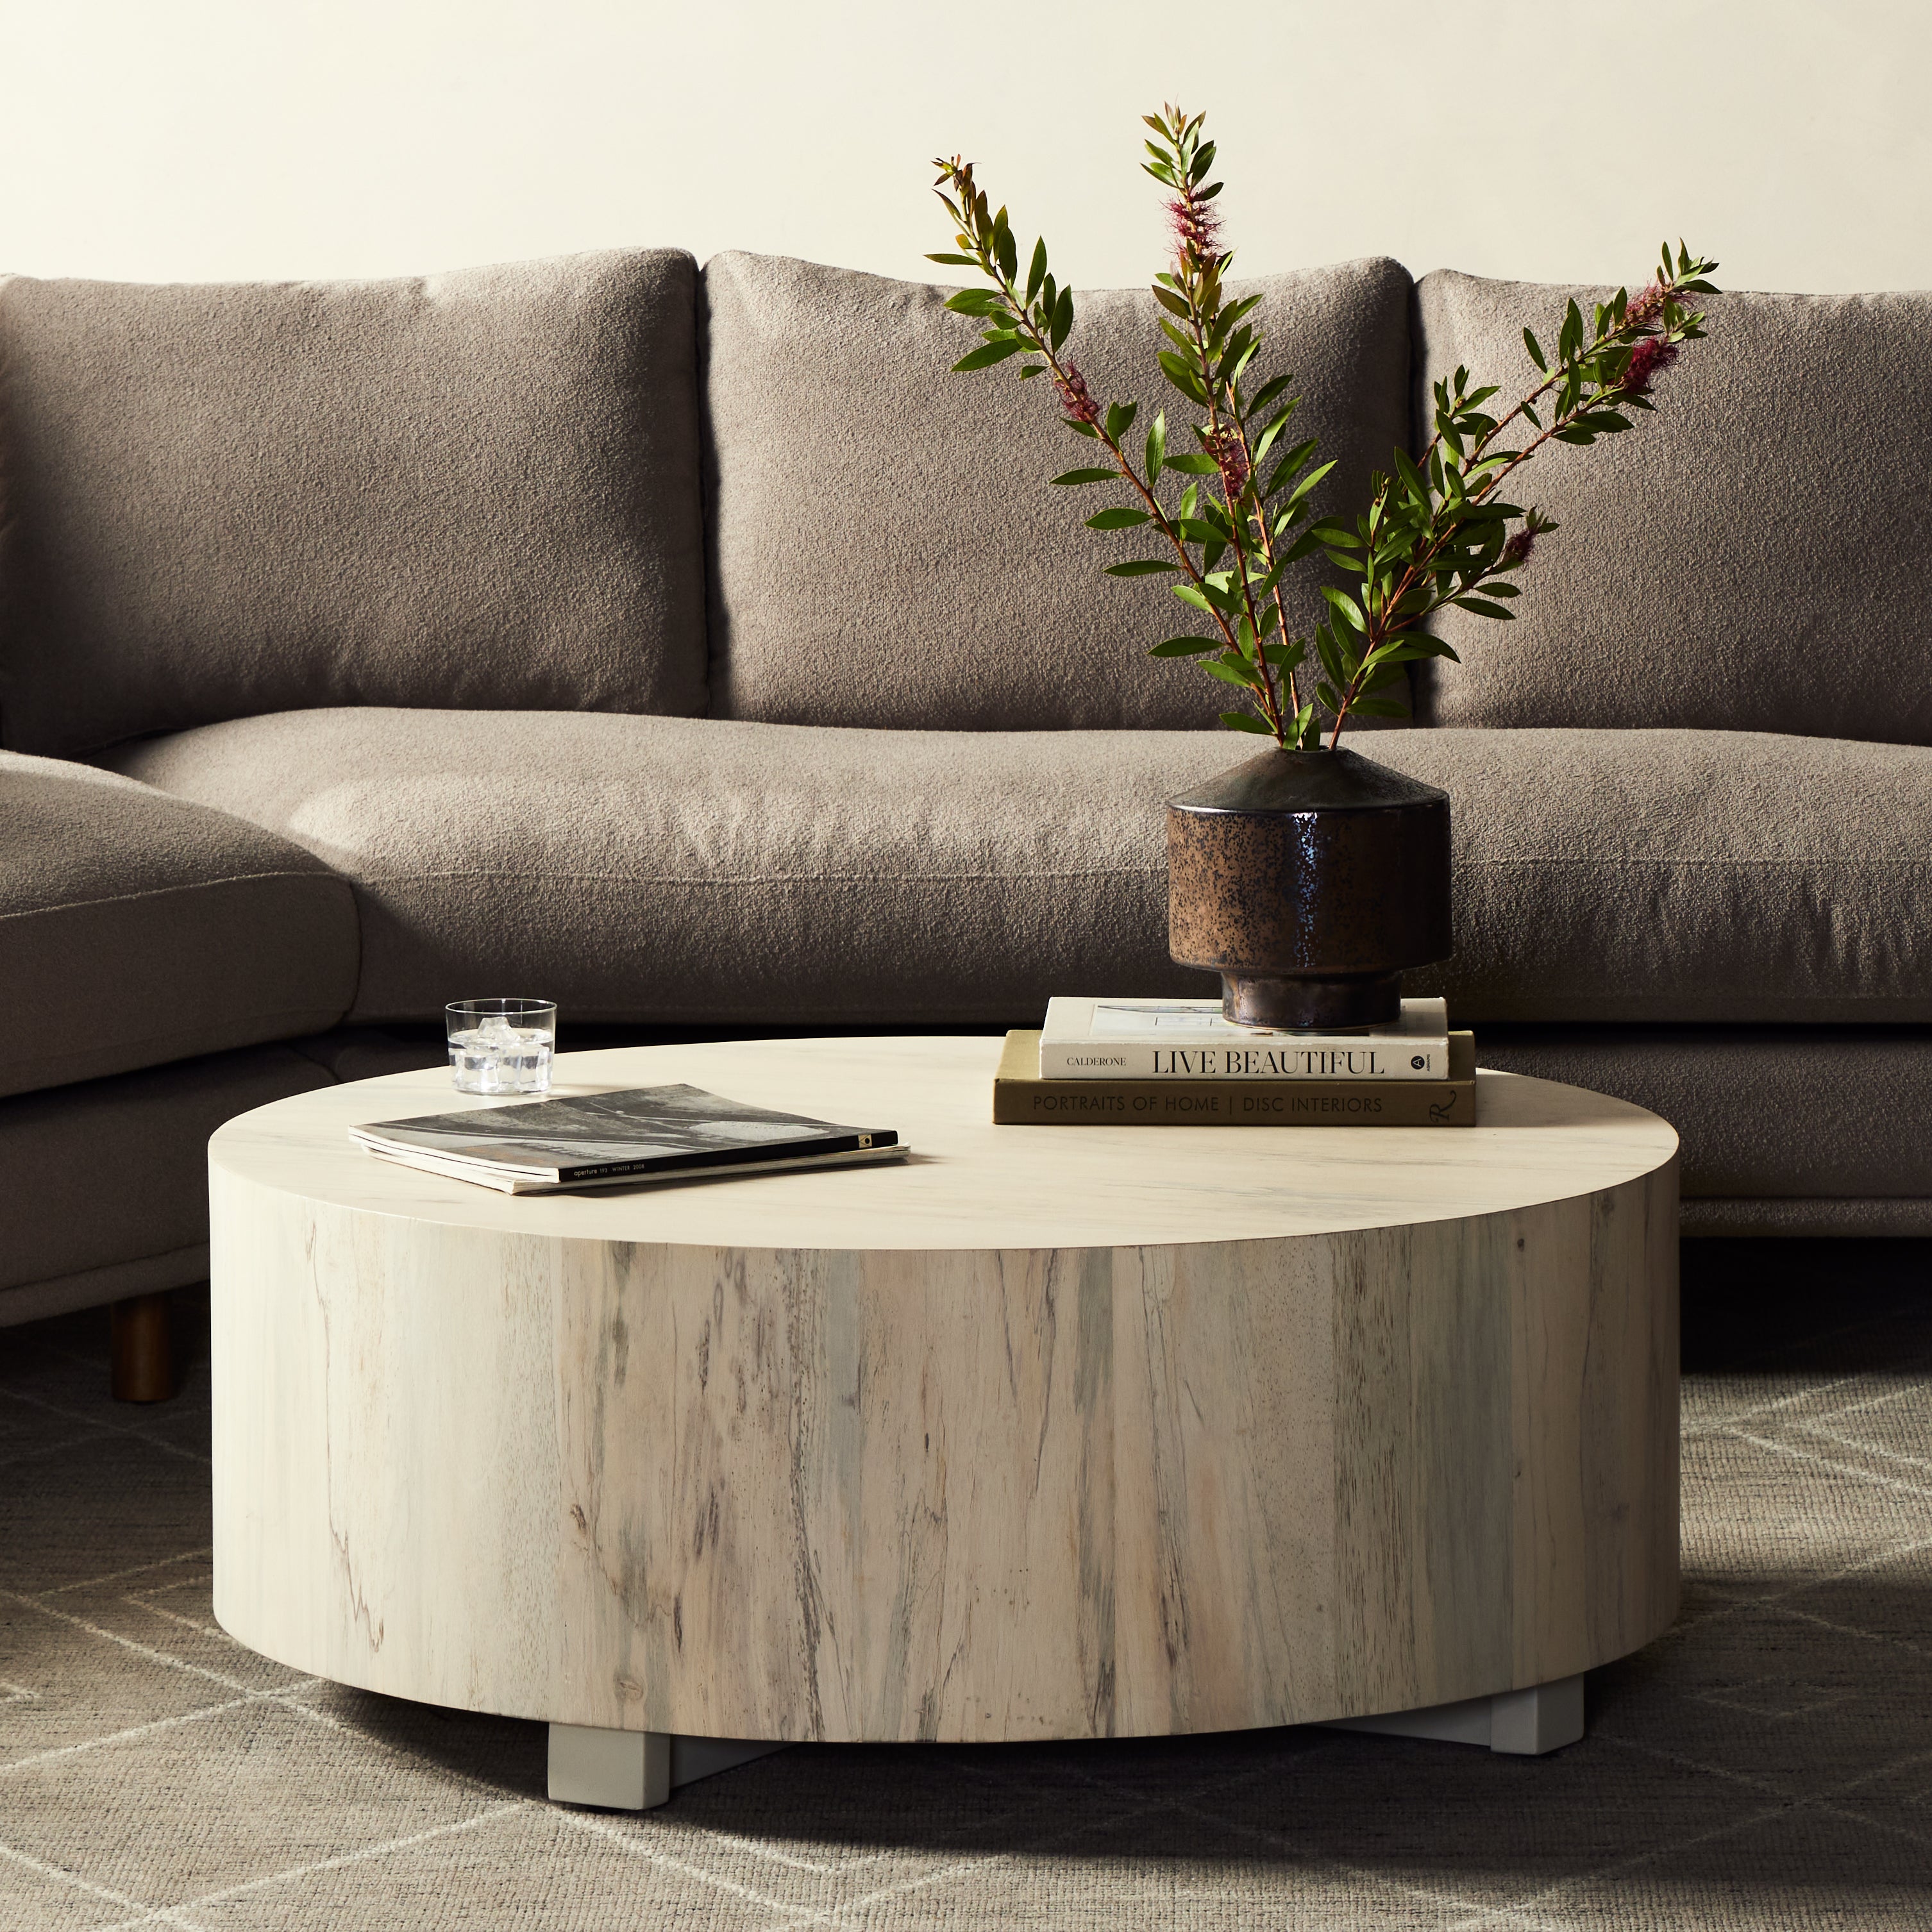 Stunning forces of nature are captured in a coffee table, as spalted primavera wood is hand-shaped into a cylindrical silhouette and finished in a white hue. Reflective of woods' natural character, a slight color variance is possible. Amethyst Home provides interior design, new construction, custom furniture, and area rugs in the Washington metro area.